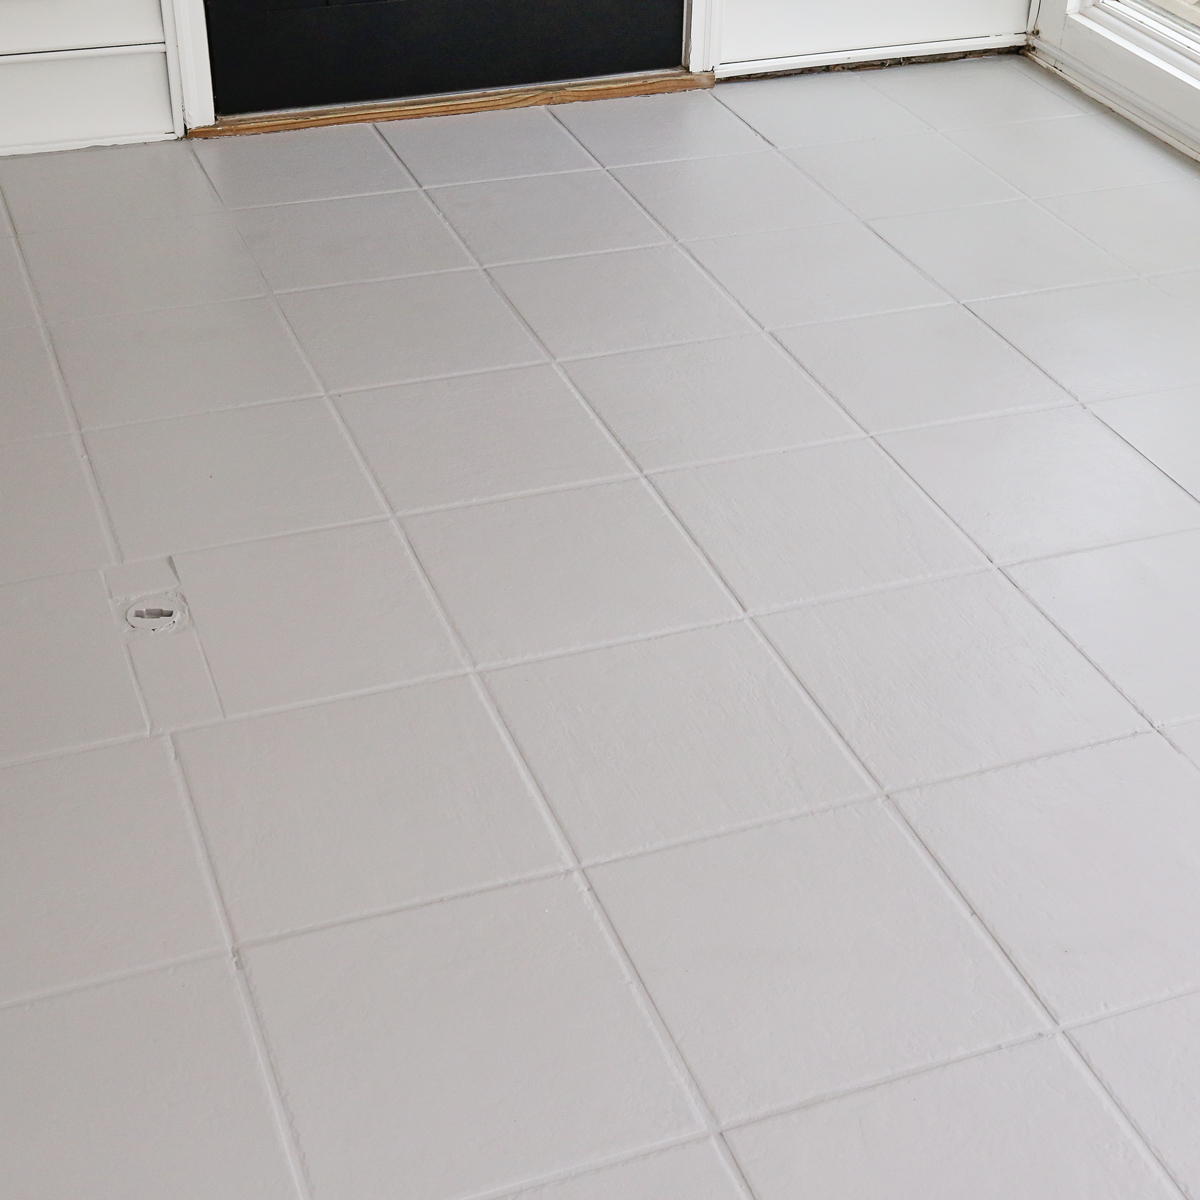 How To Paint Tile Floor Angela Marie Made, Can You Change Floor Tile Color Without Replacing